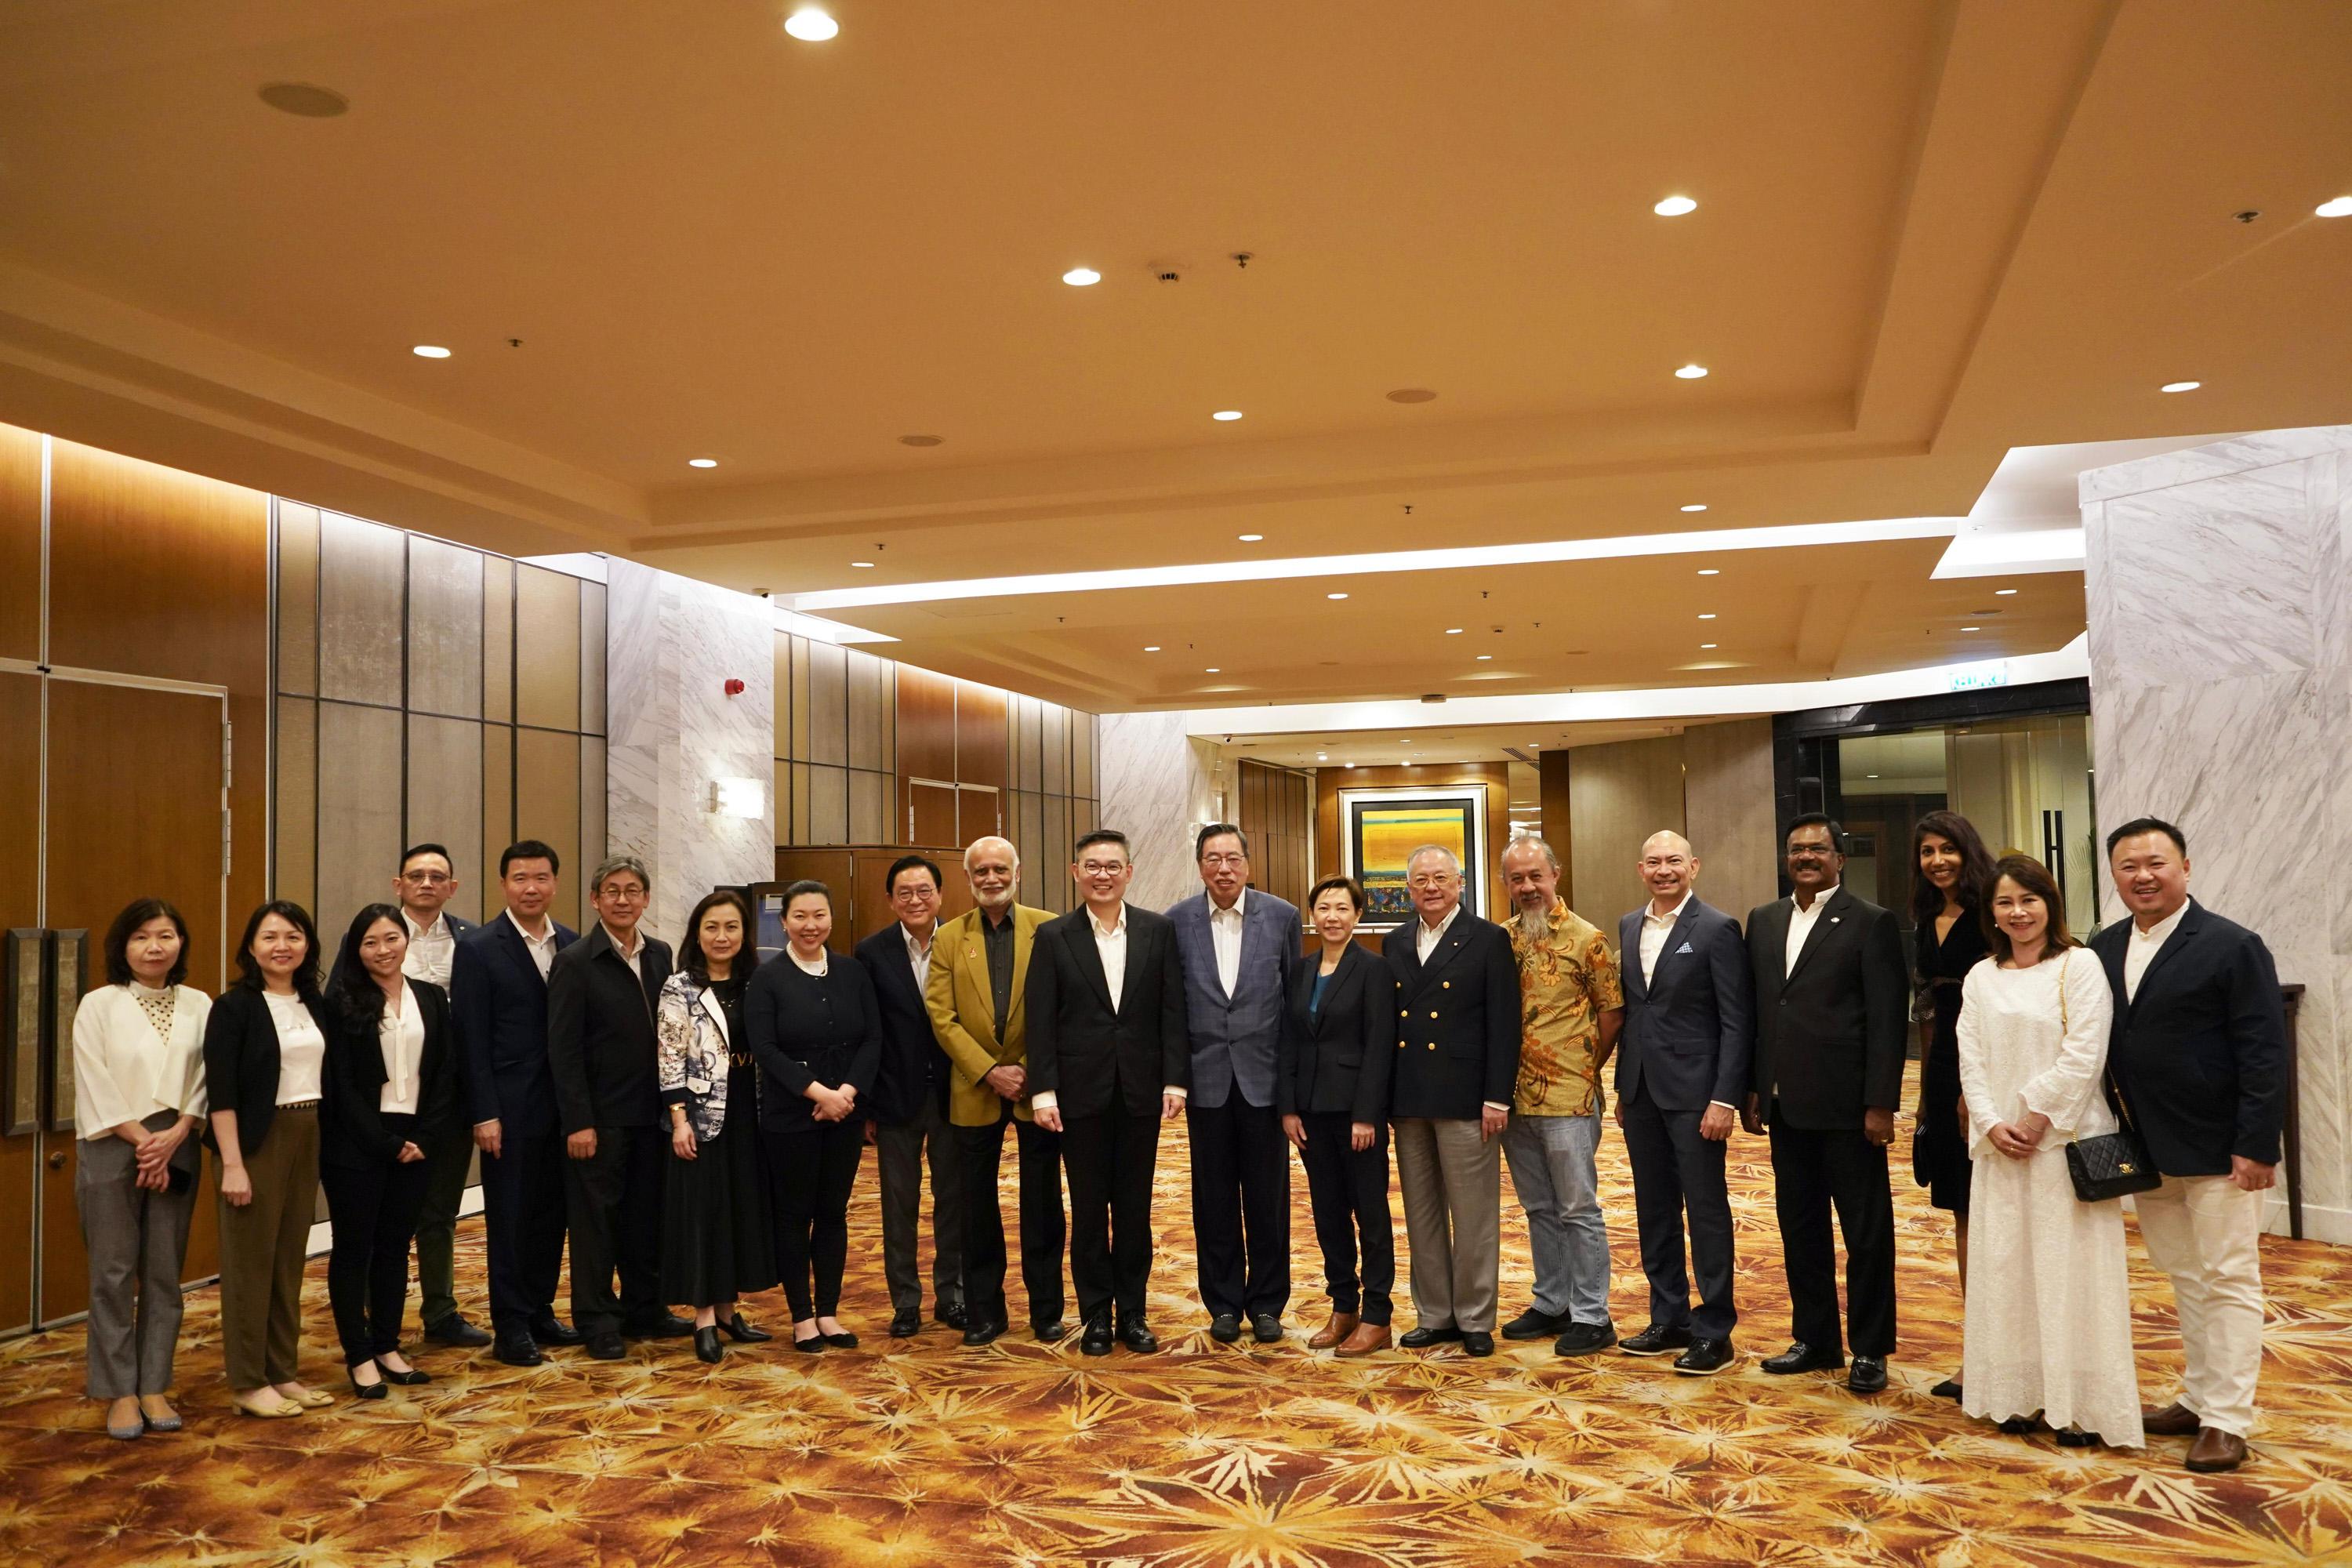 The Legislative Council (LegCo) delegation began the seven-day duty visit to Malaysia, Indonesia and Singapore today (May 12). Photo shows the delegation and representatives of the Hong Kong-Malaysia Business Association.